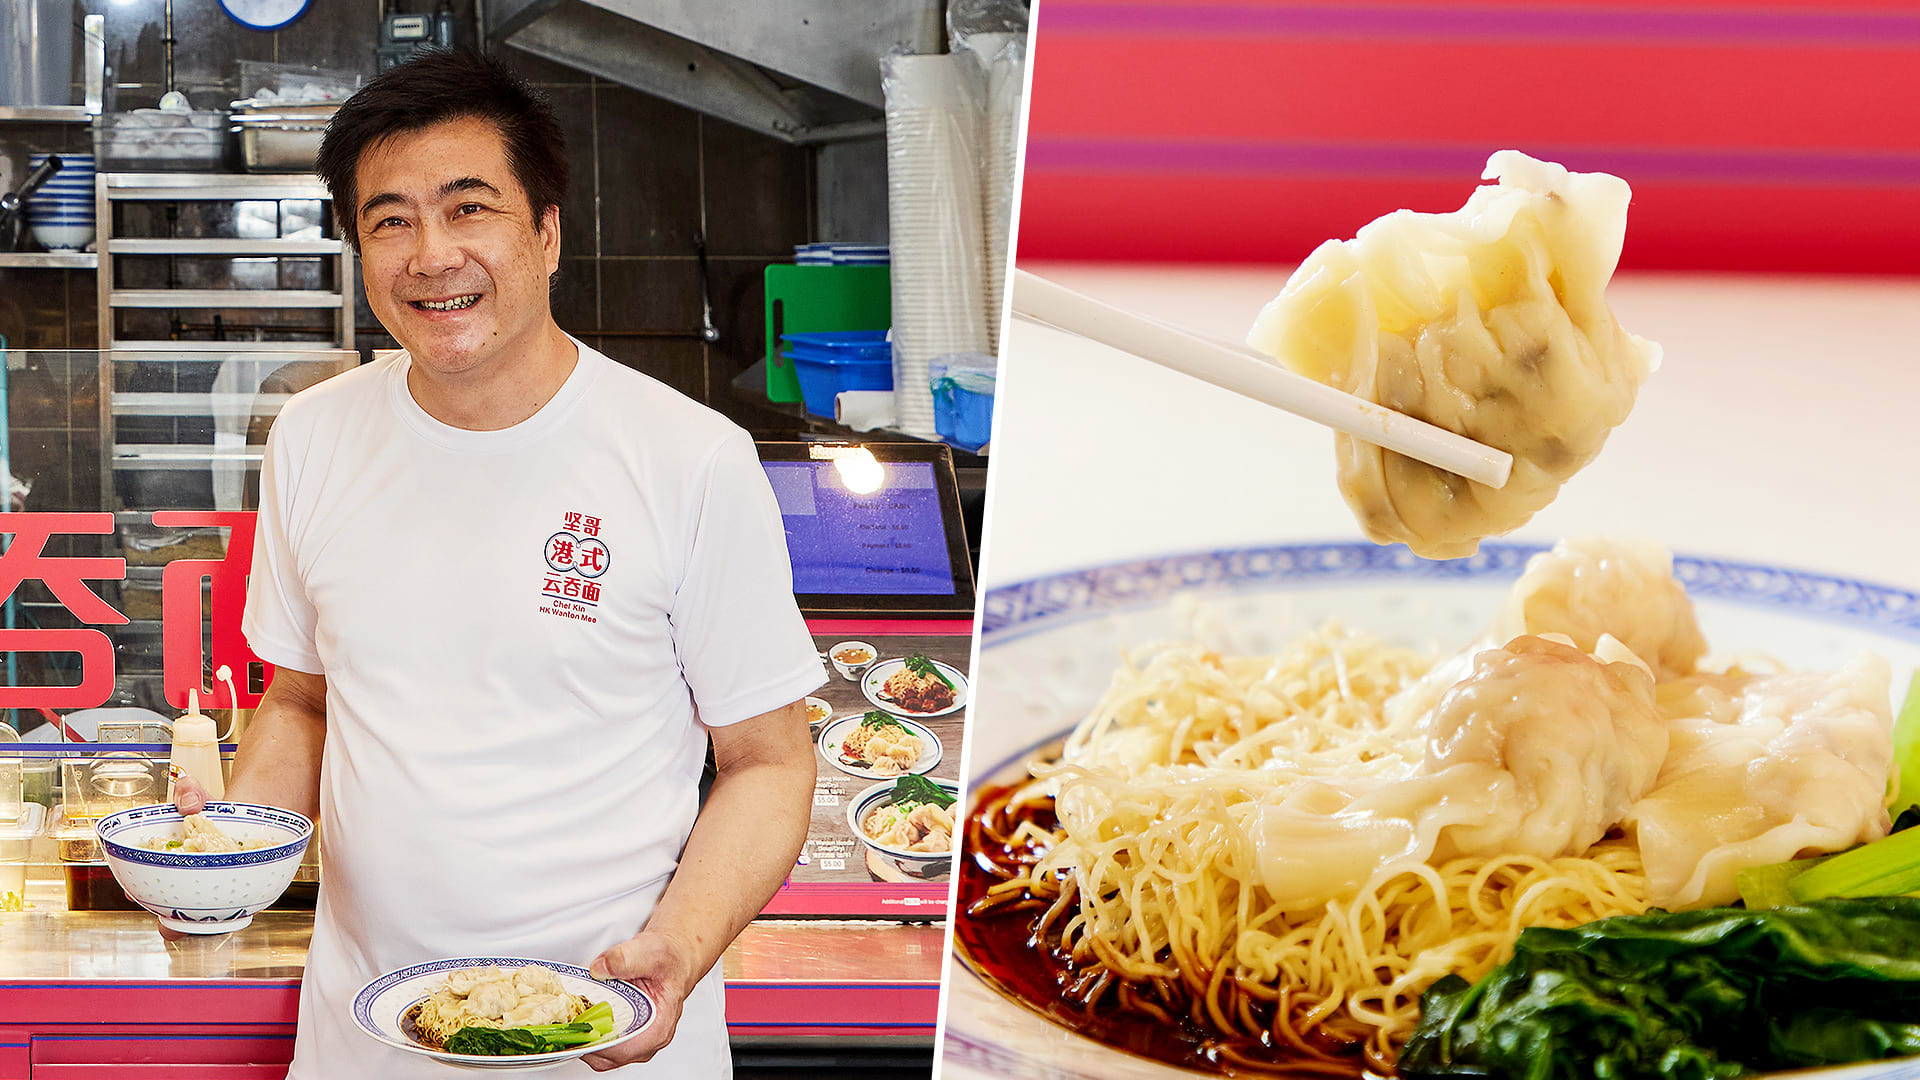 Crystal Jade Exec Chef Opens Wanton Mee Hawker Stall After 18 Years With Restaurant Group